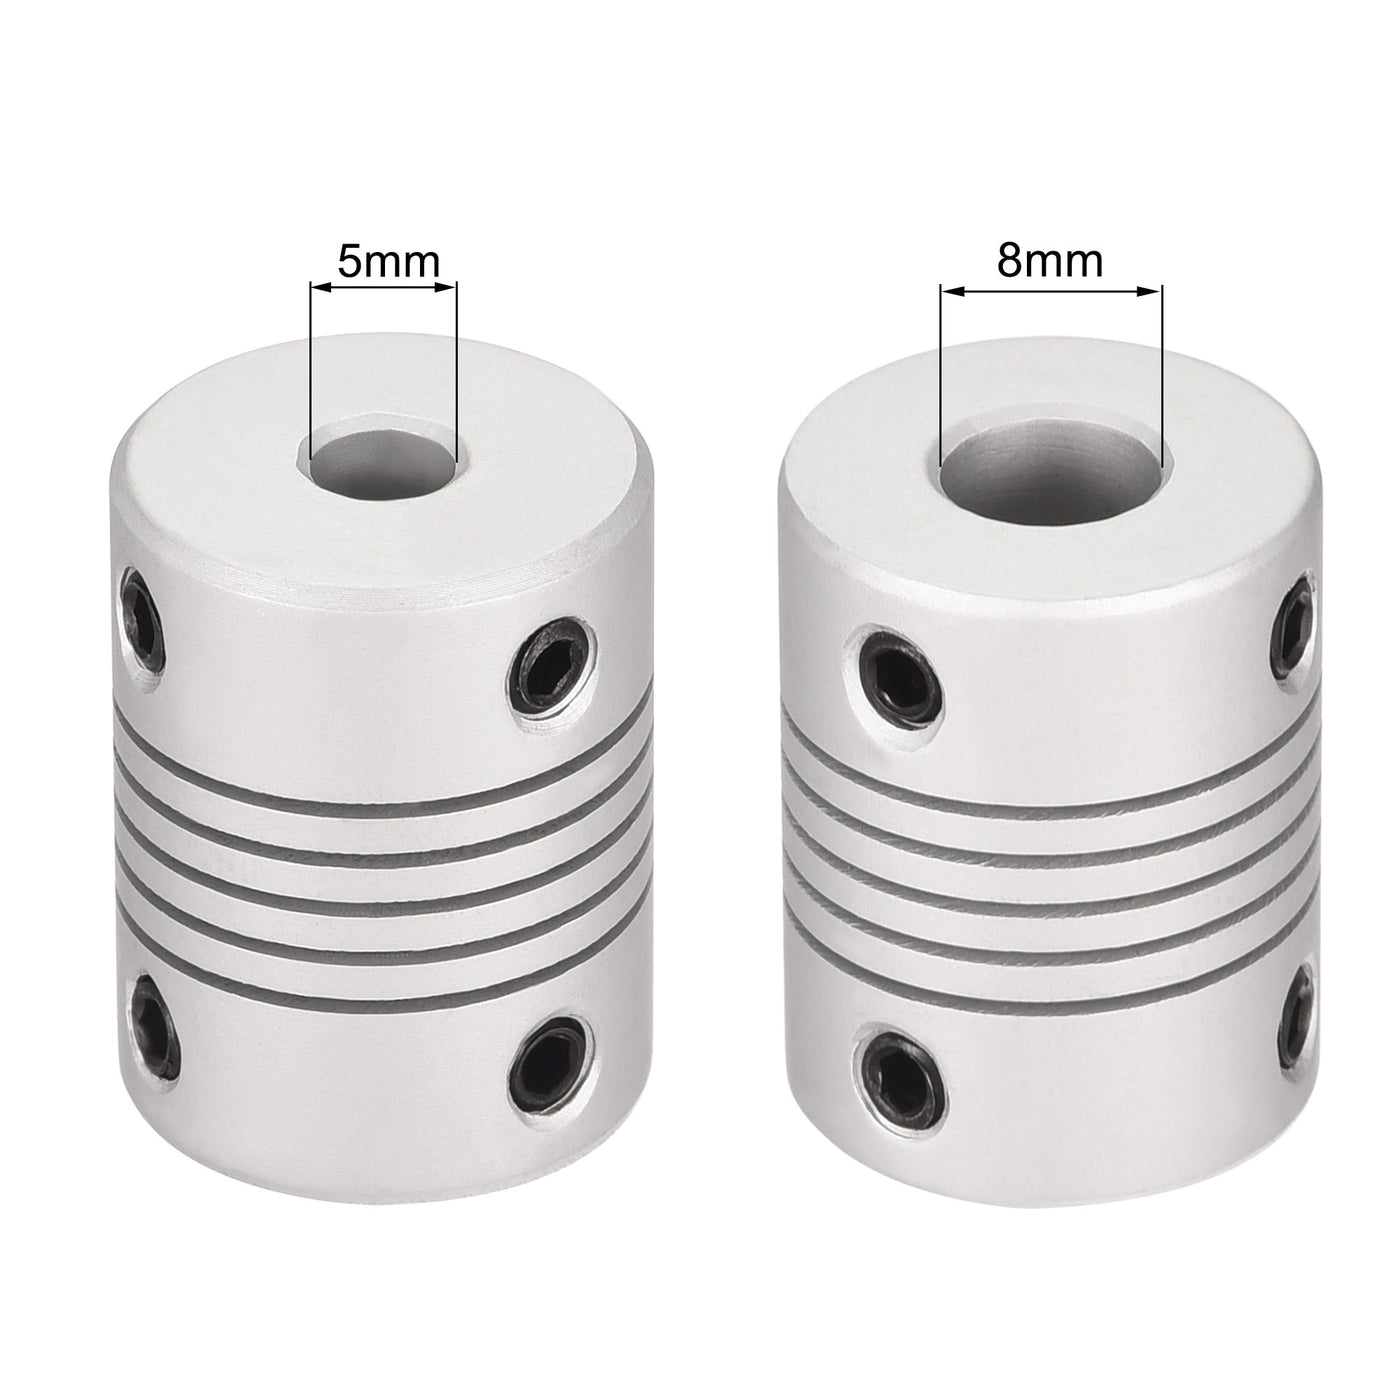 uxcell Uxcell 5mm to 8mm Aluminum Alloy Shaft Coupling Flexible Coupler L25xD19 Silver,2pcs